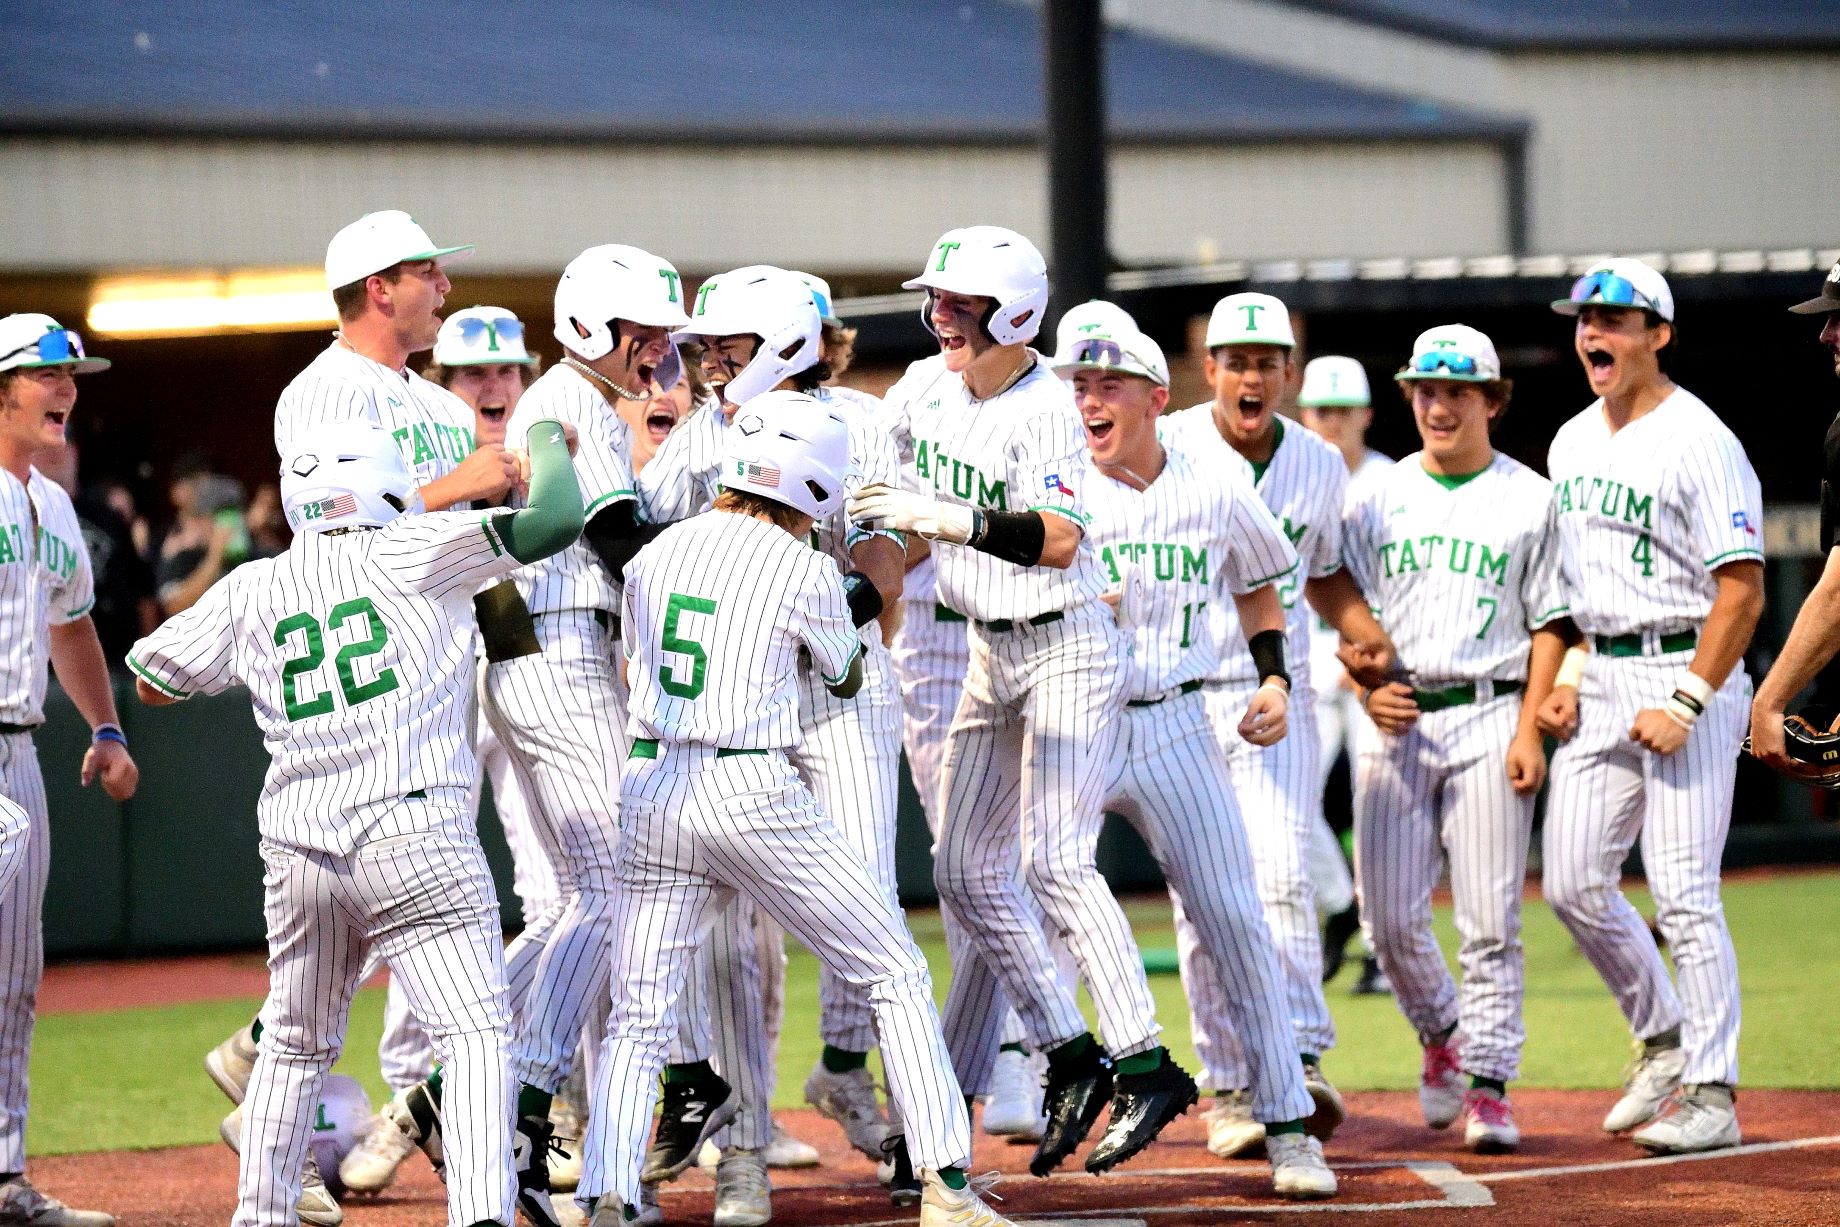 Tatum senior Carson Gonzalez gets mobbed by his teammates after hitting a grand slam against West Rusk Friday in the Eagles' 7-4 win. Tatum advances to the UIL Class 3A Regional Semifinals for a second straight season. (Photo by RONNIE SARTORS - SPORT SHOT PHOTOGRAPHY - ETBLITZ.COM)